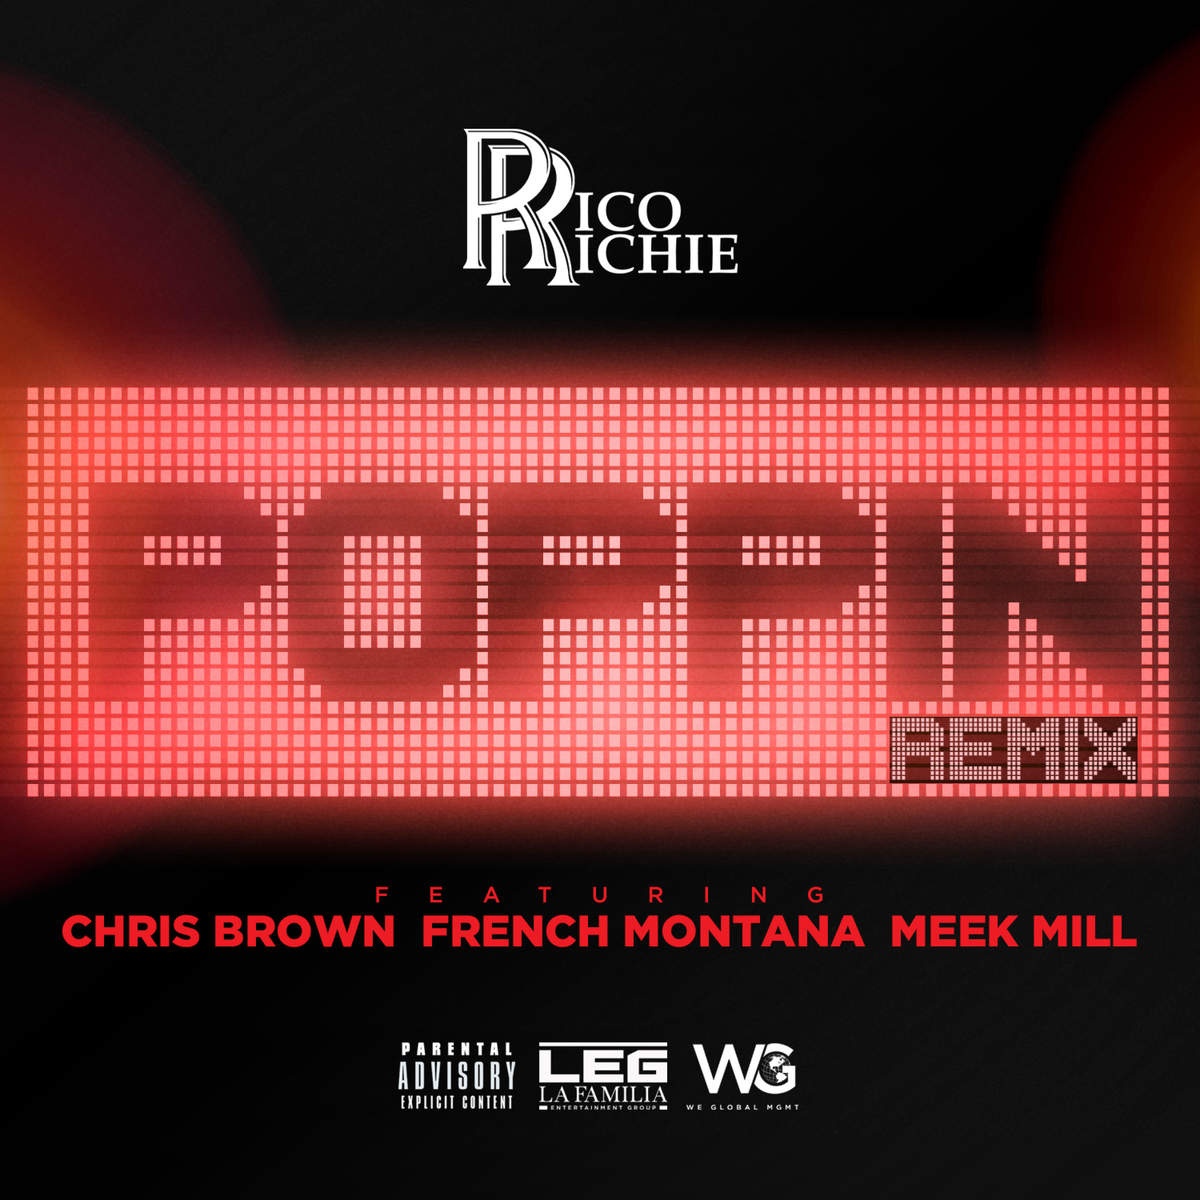 Poppin' (Remix) [feat. Chris Brown, French Montana & Meek Mill]